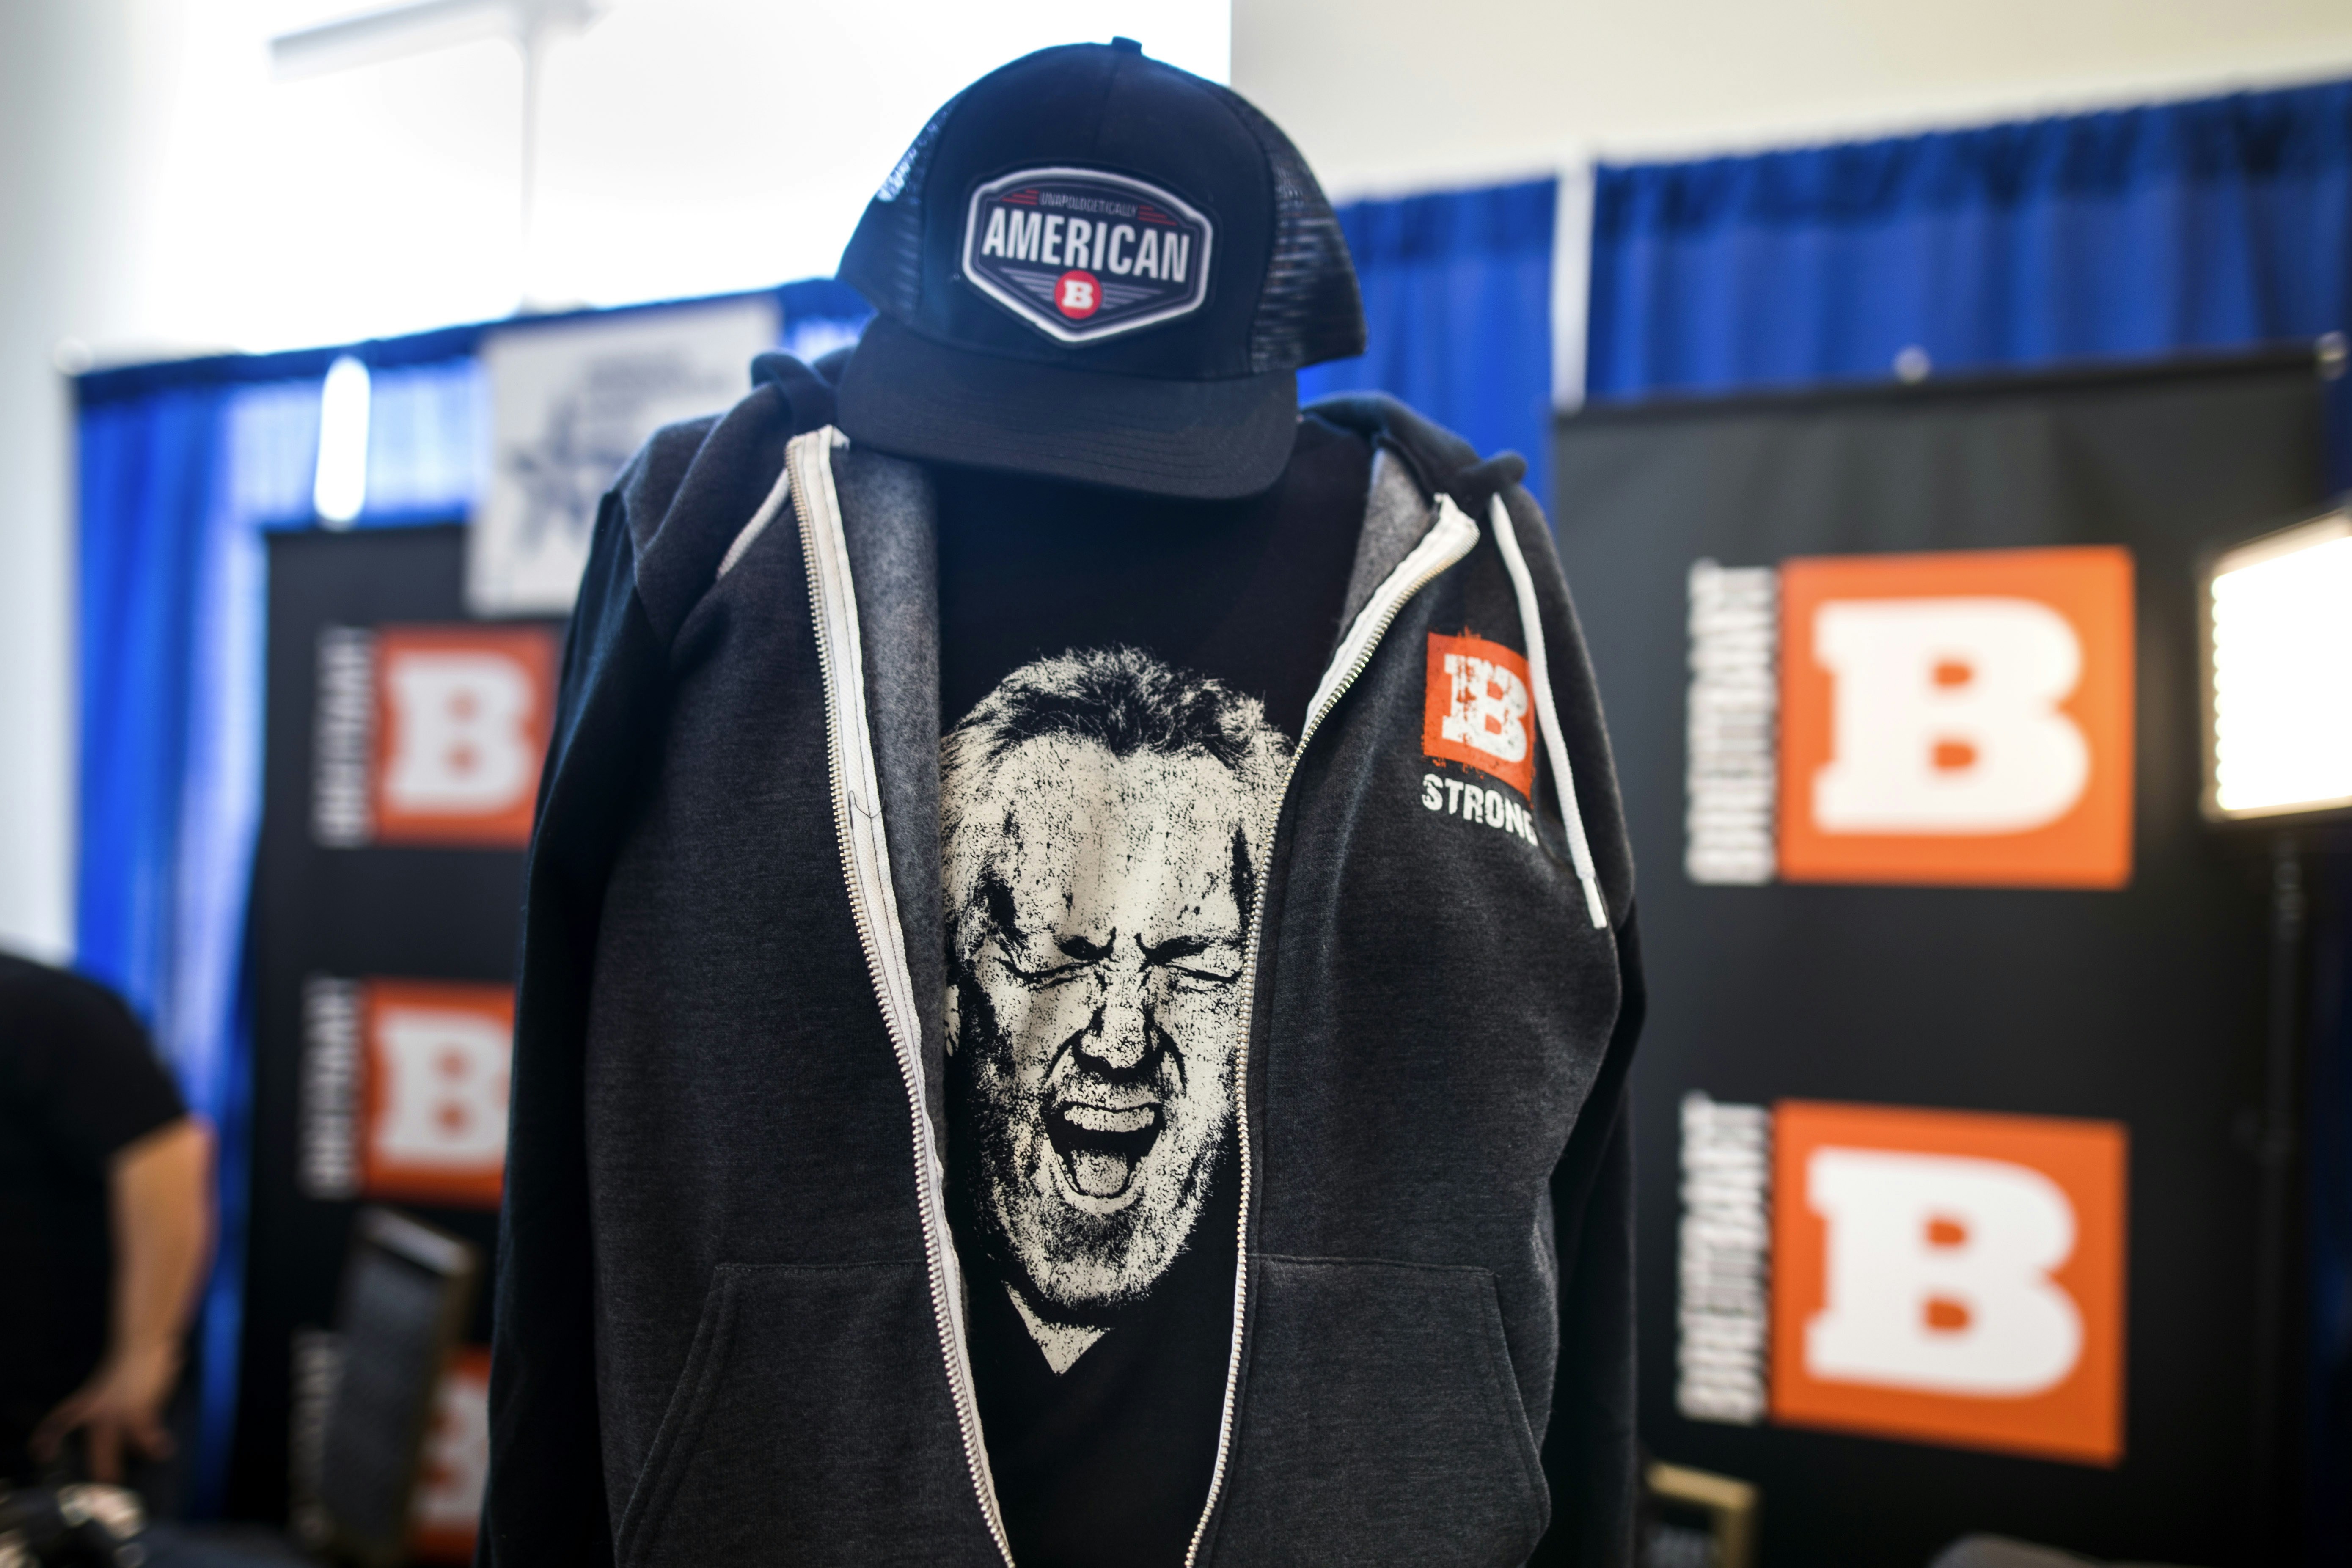 epa05810792 The late founder of Bretibart News, Andrew Breitbart, is seen on a t-shirt at the 44th Annual Conservative Political Action Conference (CPAC) at the Gaylord National Resort & Convention Center in National Harbor, Maryland, USA, 23 February 2017. US President Trump is expected to address the conference on 24 February.  EPA/JIM LO SCALZO